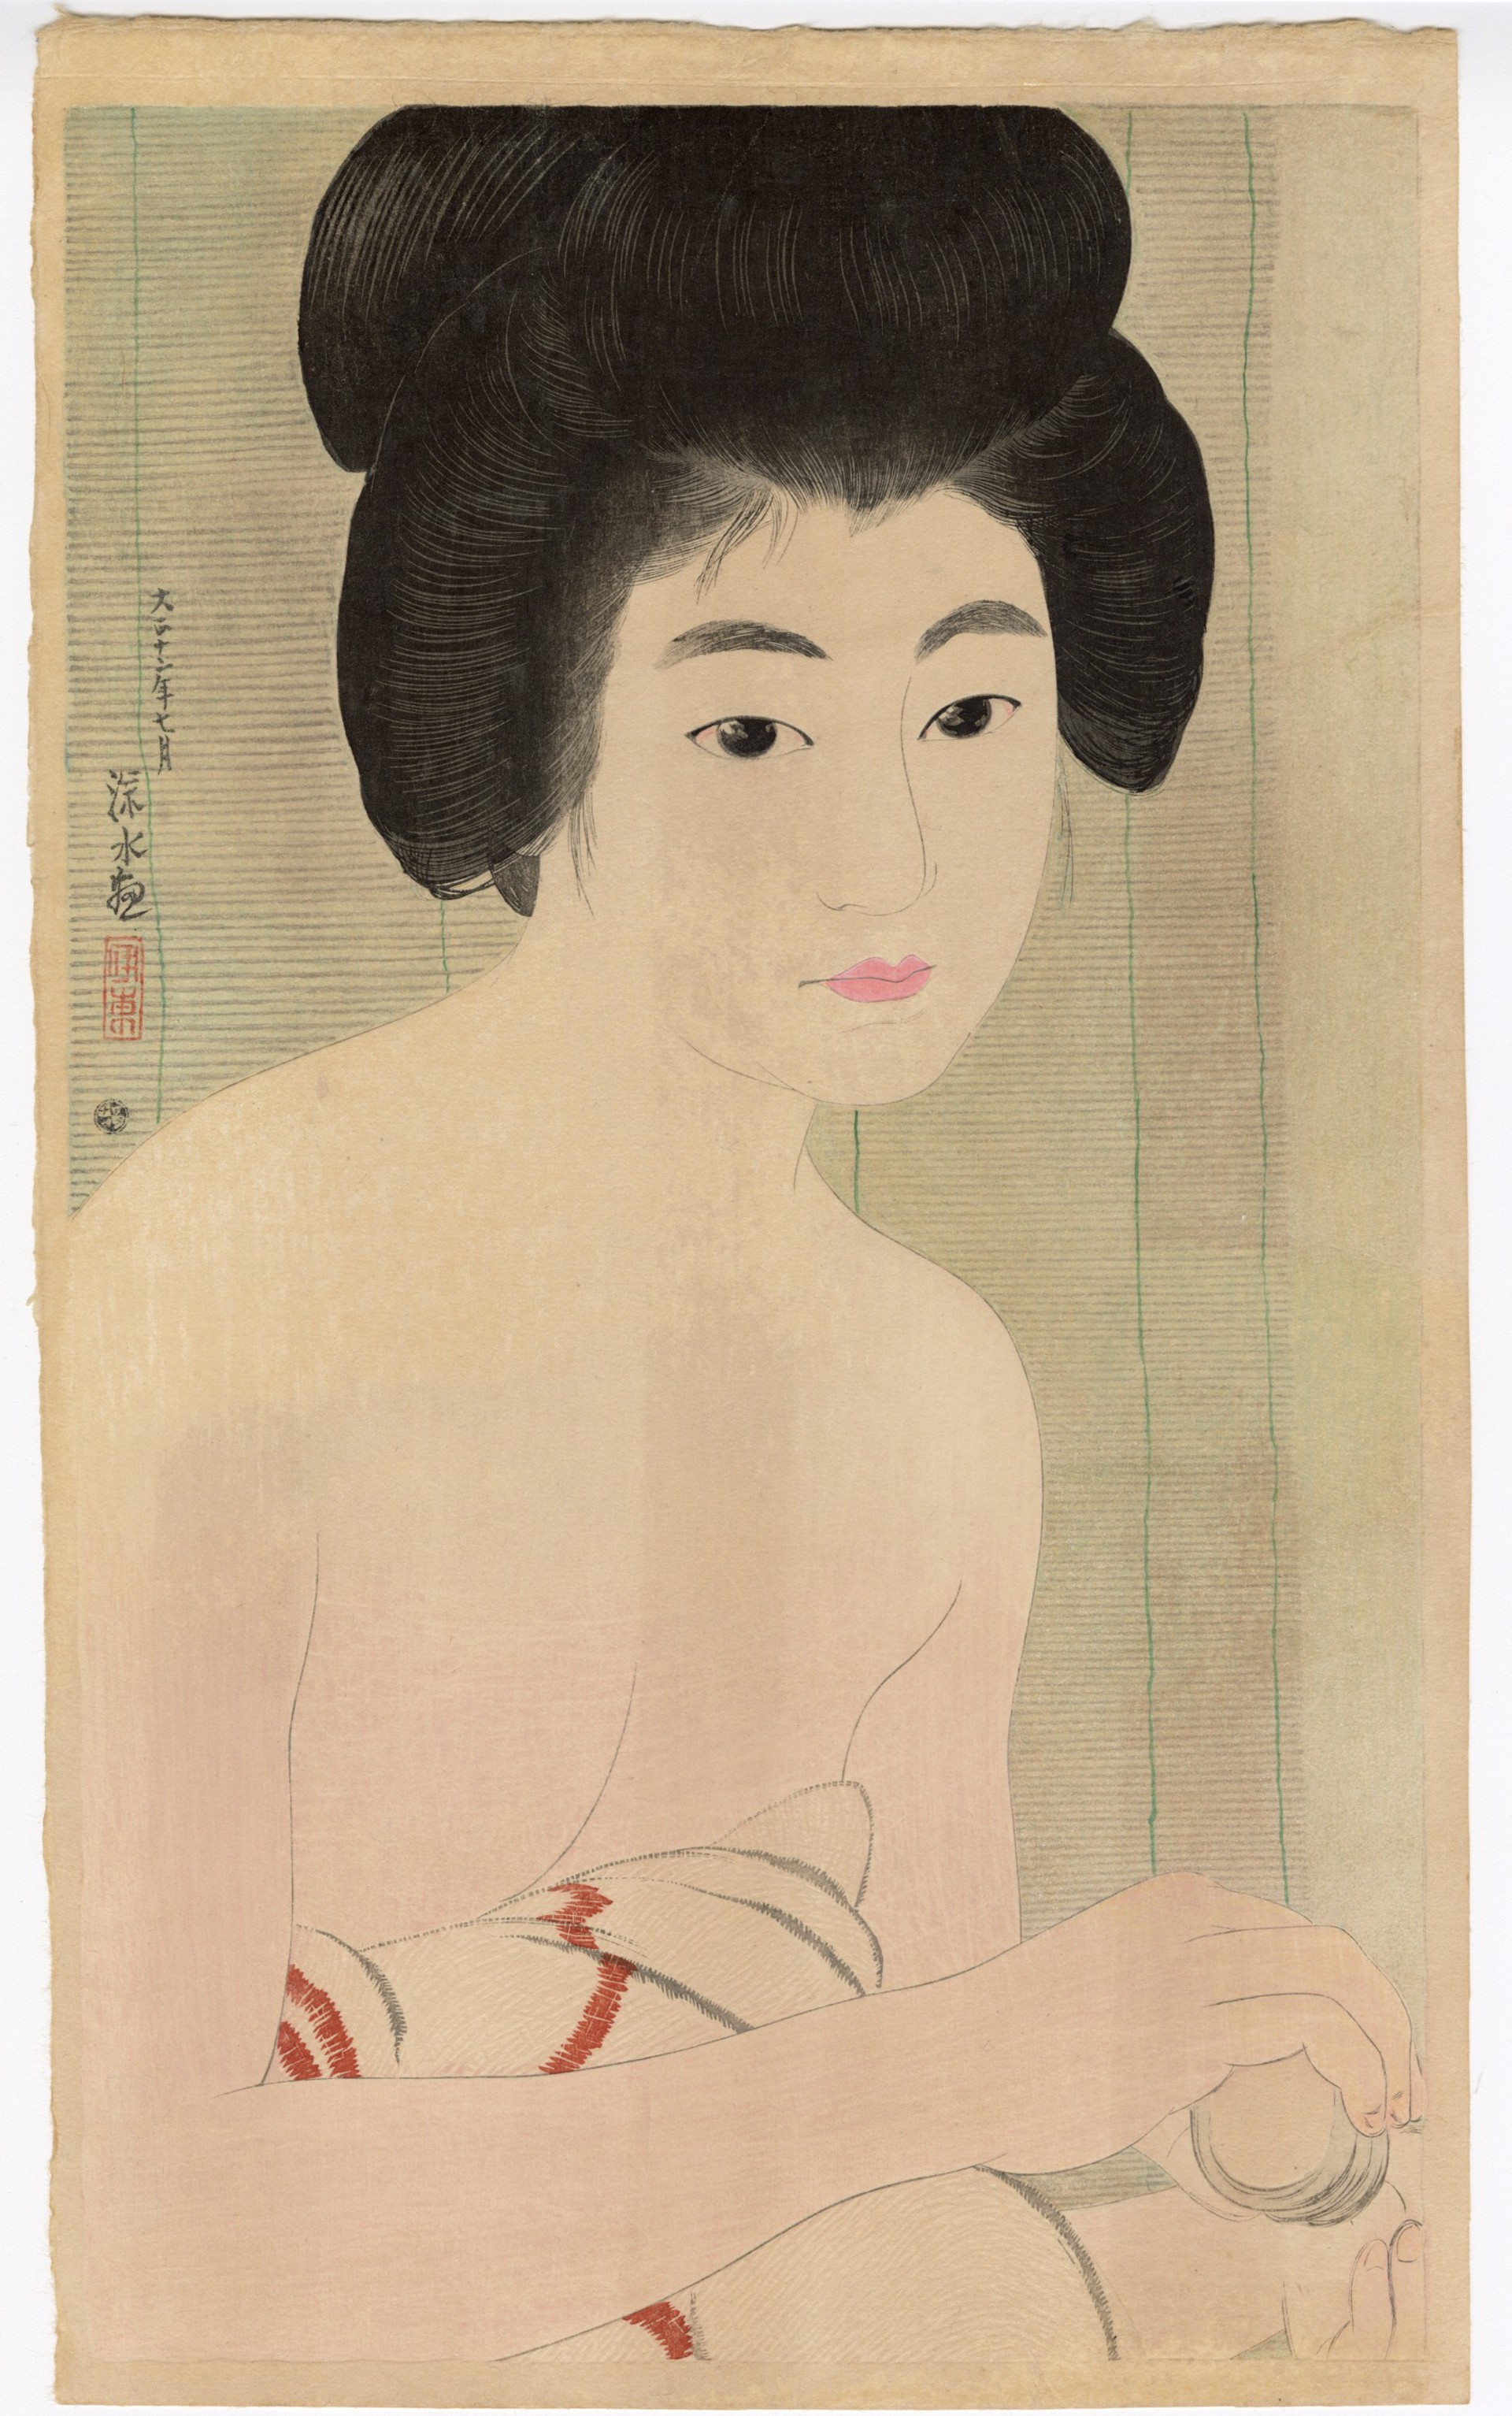 Powdering  46/200 New 12 Images of Beauties by Shinsui